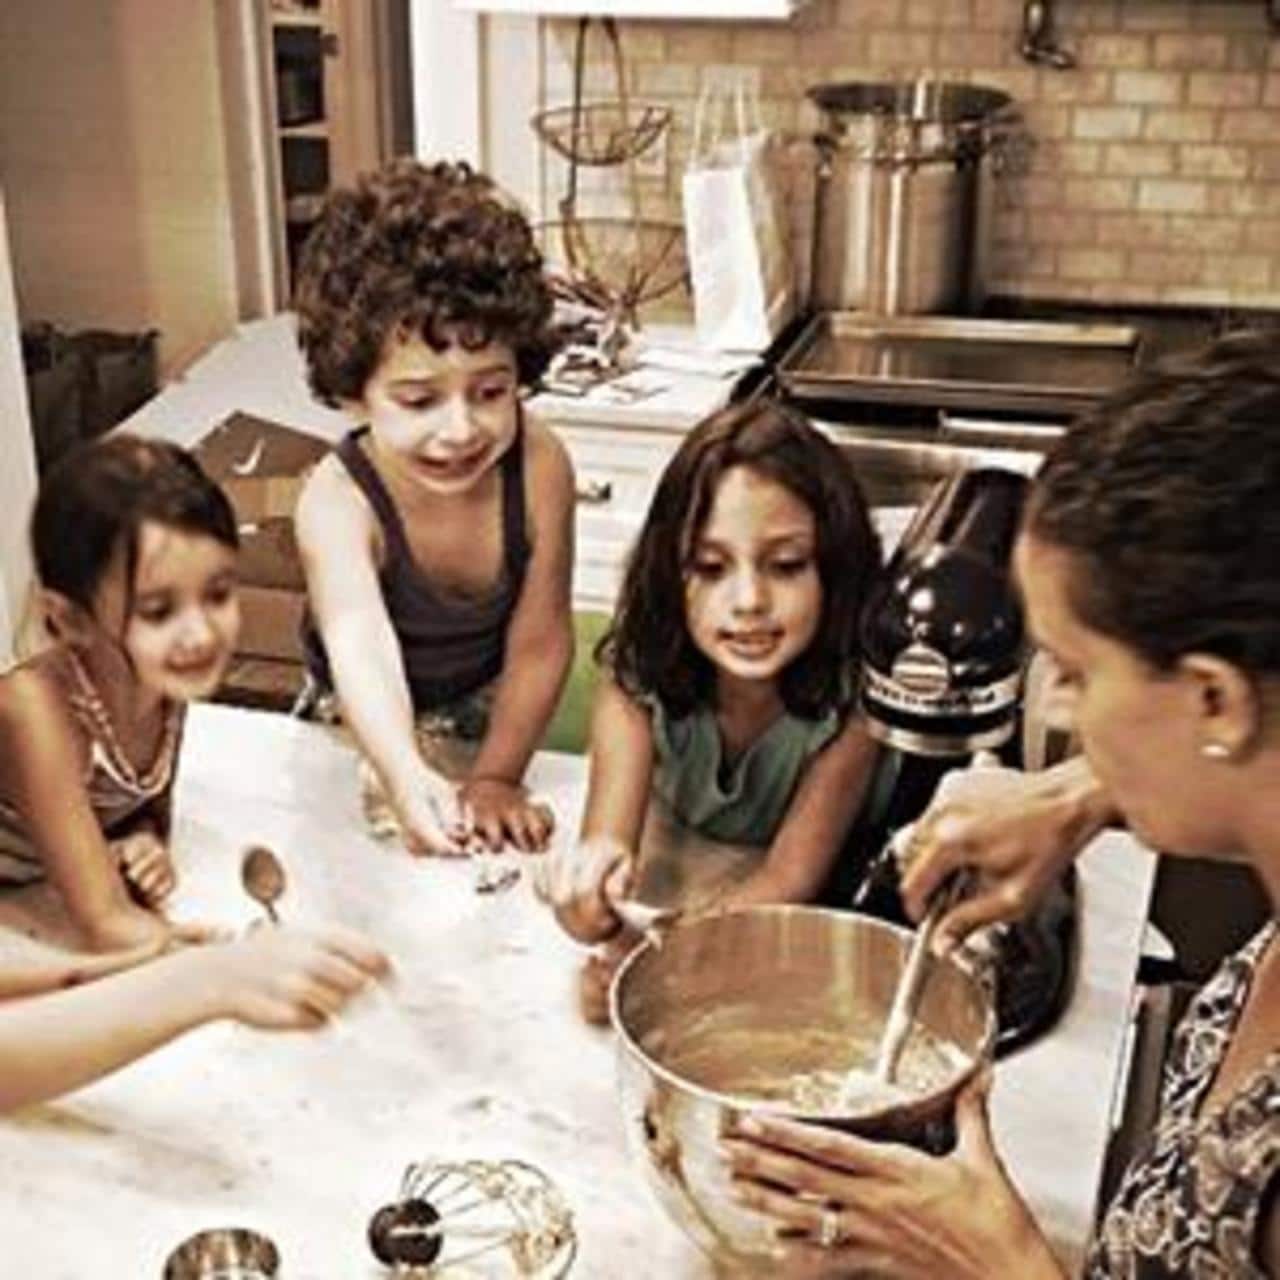 Fiddleheads Cooking Studio will open in Pound Ridge next month and offer cooking classes for children.